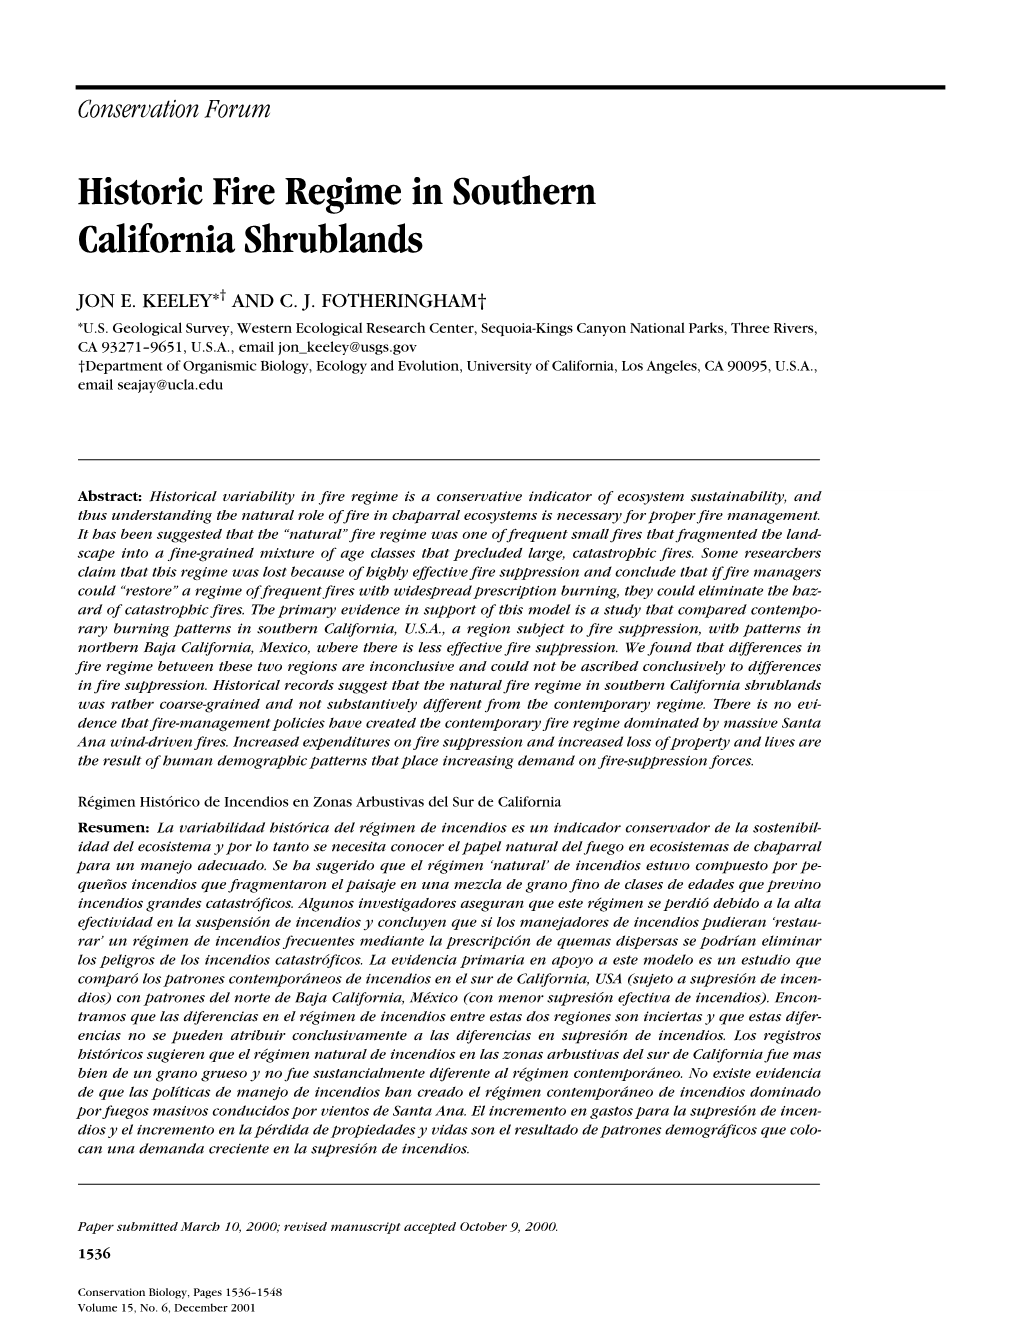 Historic Fire Regime in Southern California Shrublands